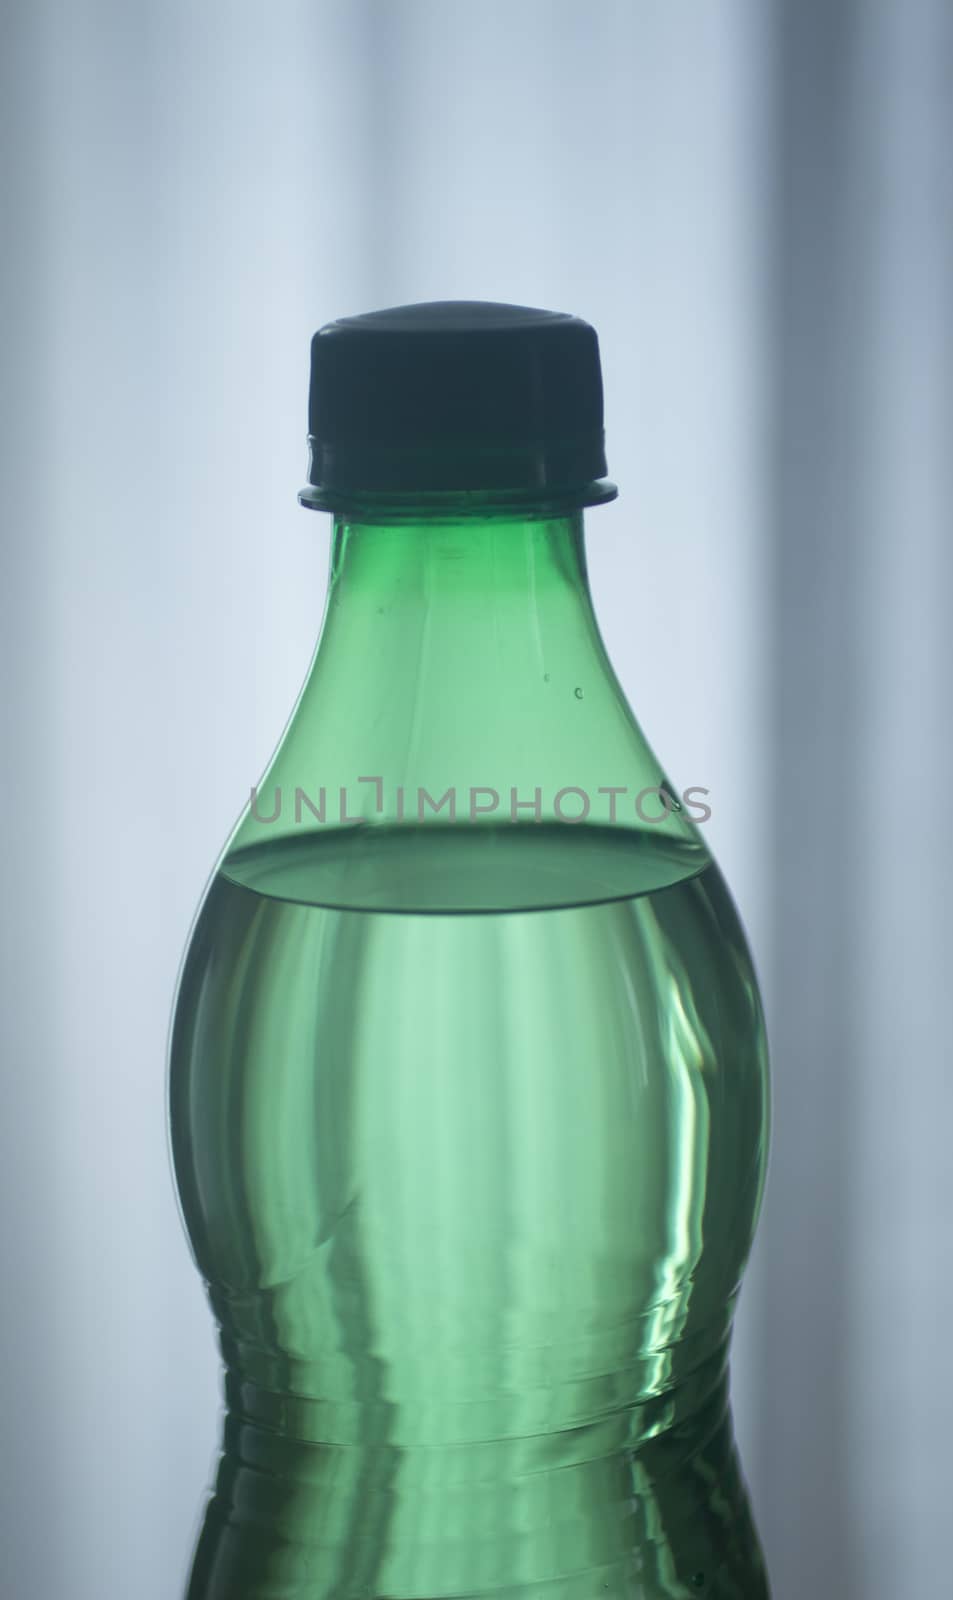 Isolated plastic water bottle on a plain blue studio background close-up photo.